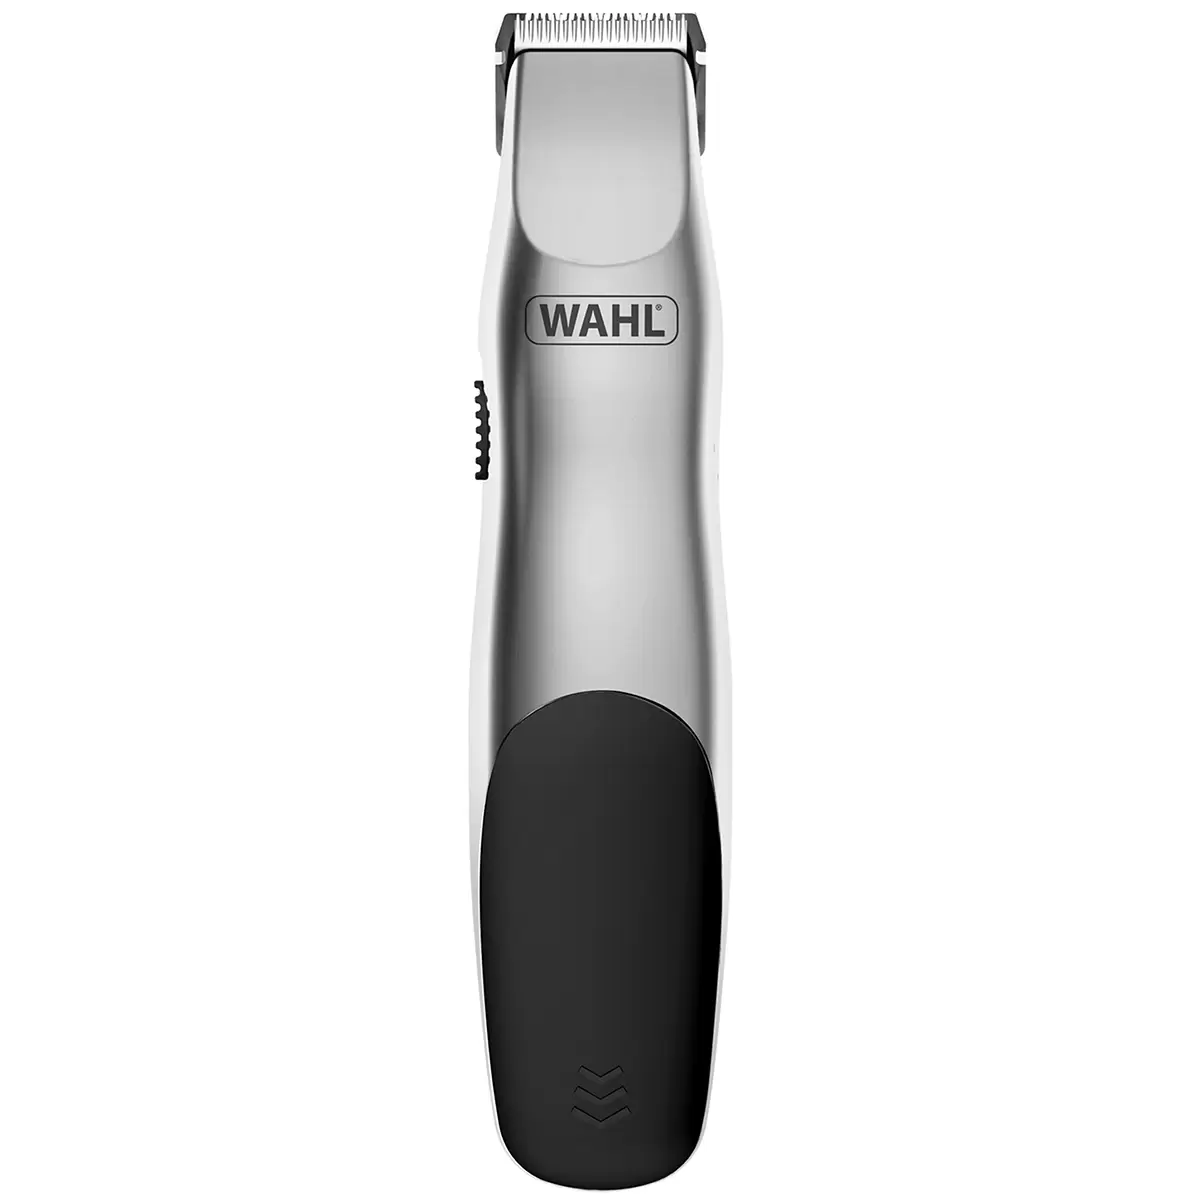 Wahl Haircutting Home Kit 30 Pieces 3026406